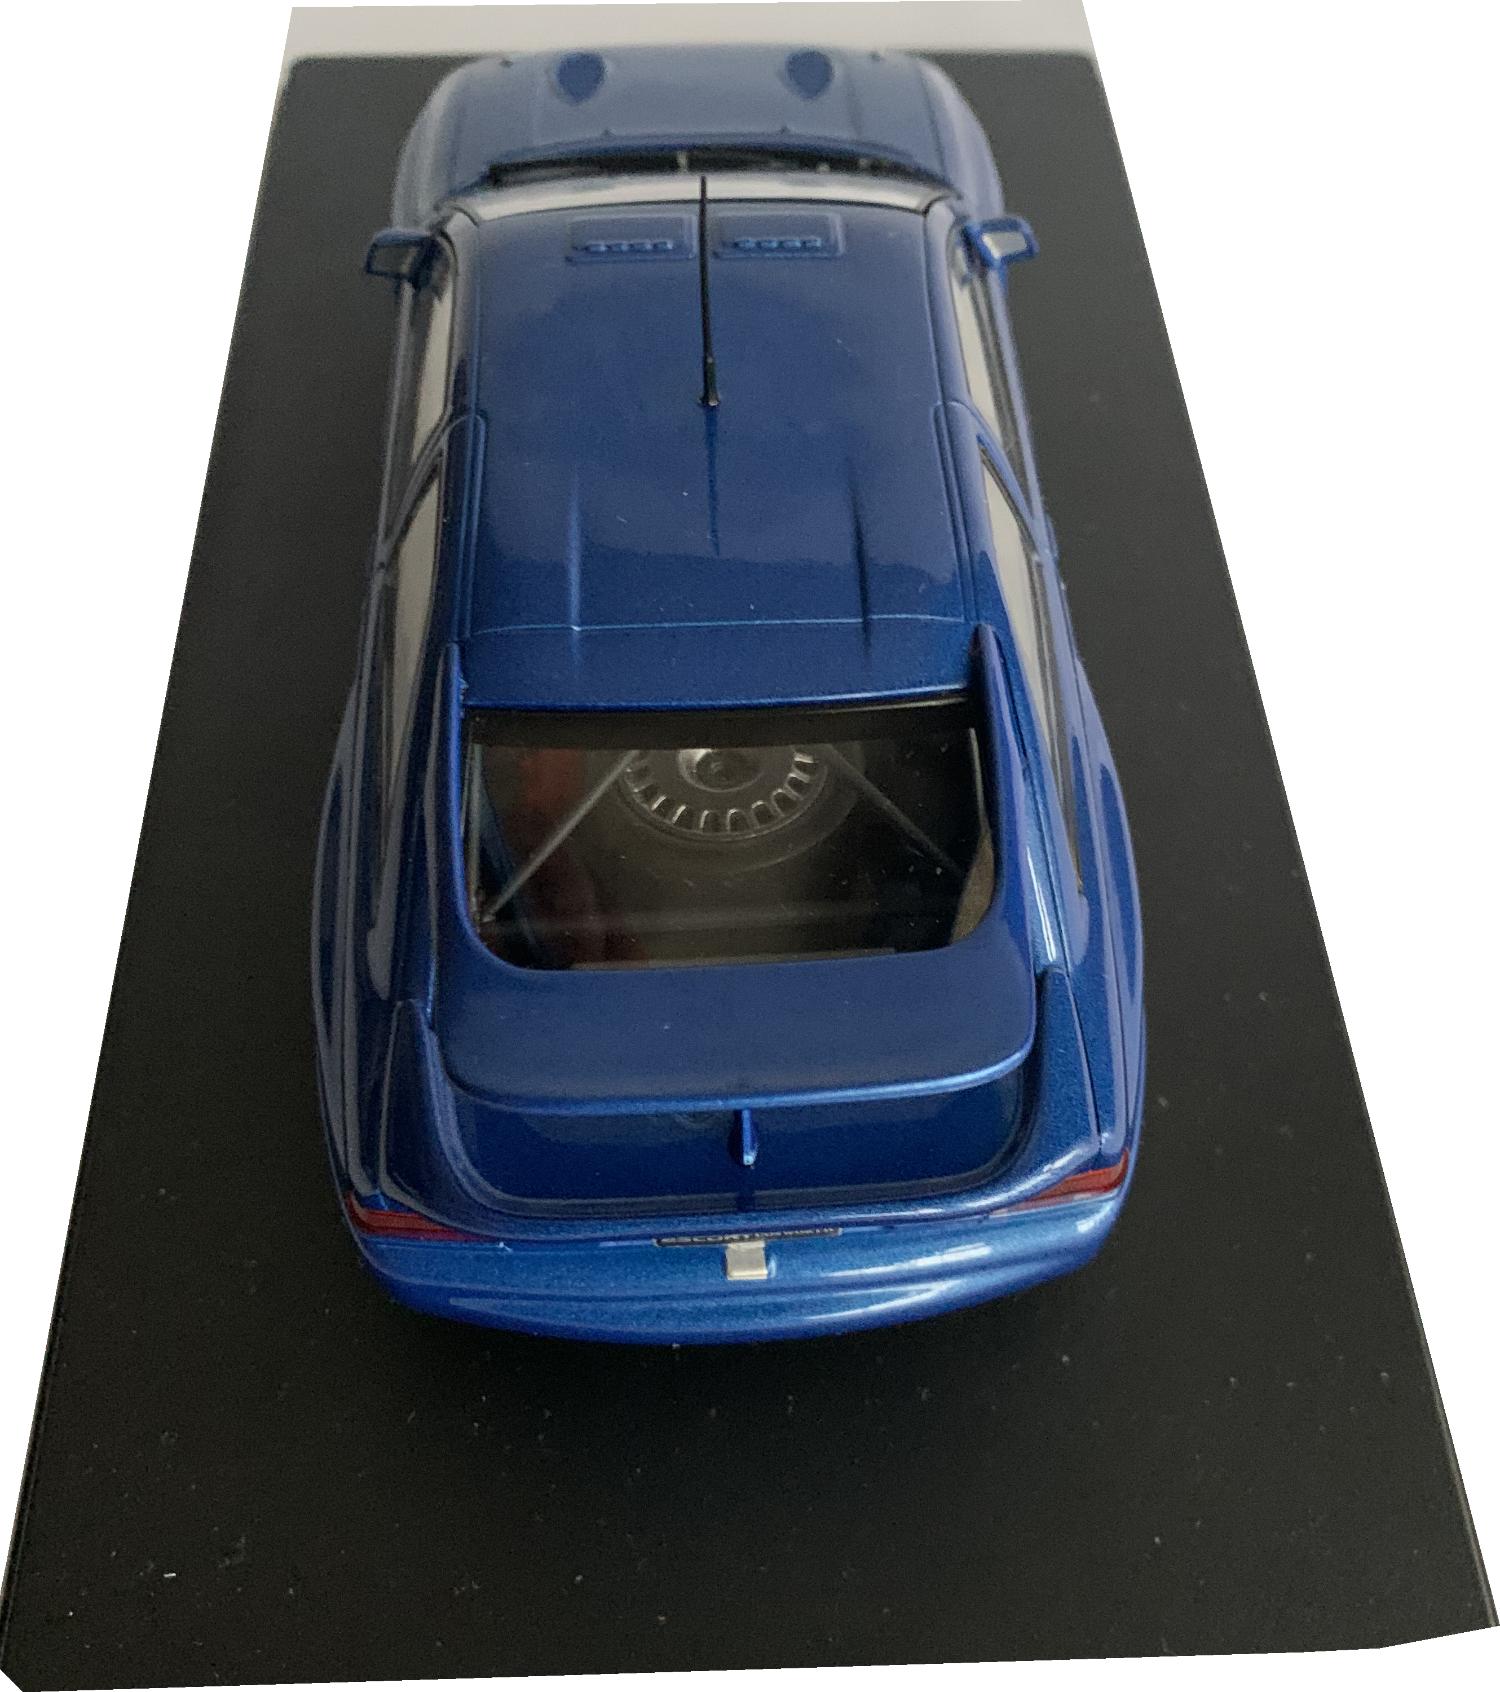 An excellent reproduction of the Ford Escort RS Cosworth with high level of detail throughout, all authentically recreated. The model is presented in a window display box, the car is approx. 17 cm long and the presentation box is 25 cm long